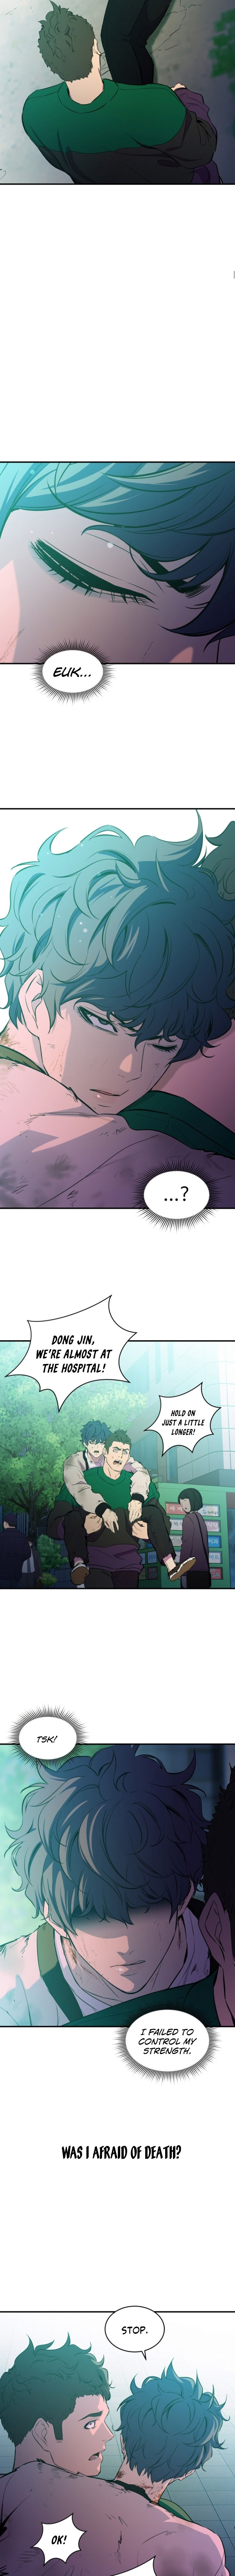 Incompetent Villain - Chapter 2 Page 10